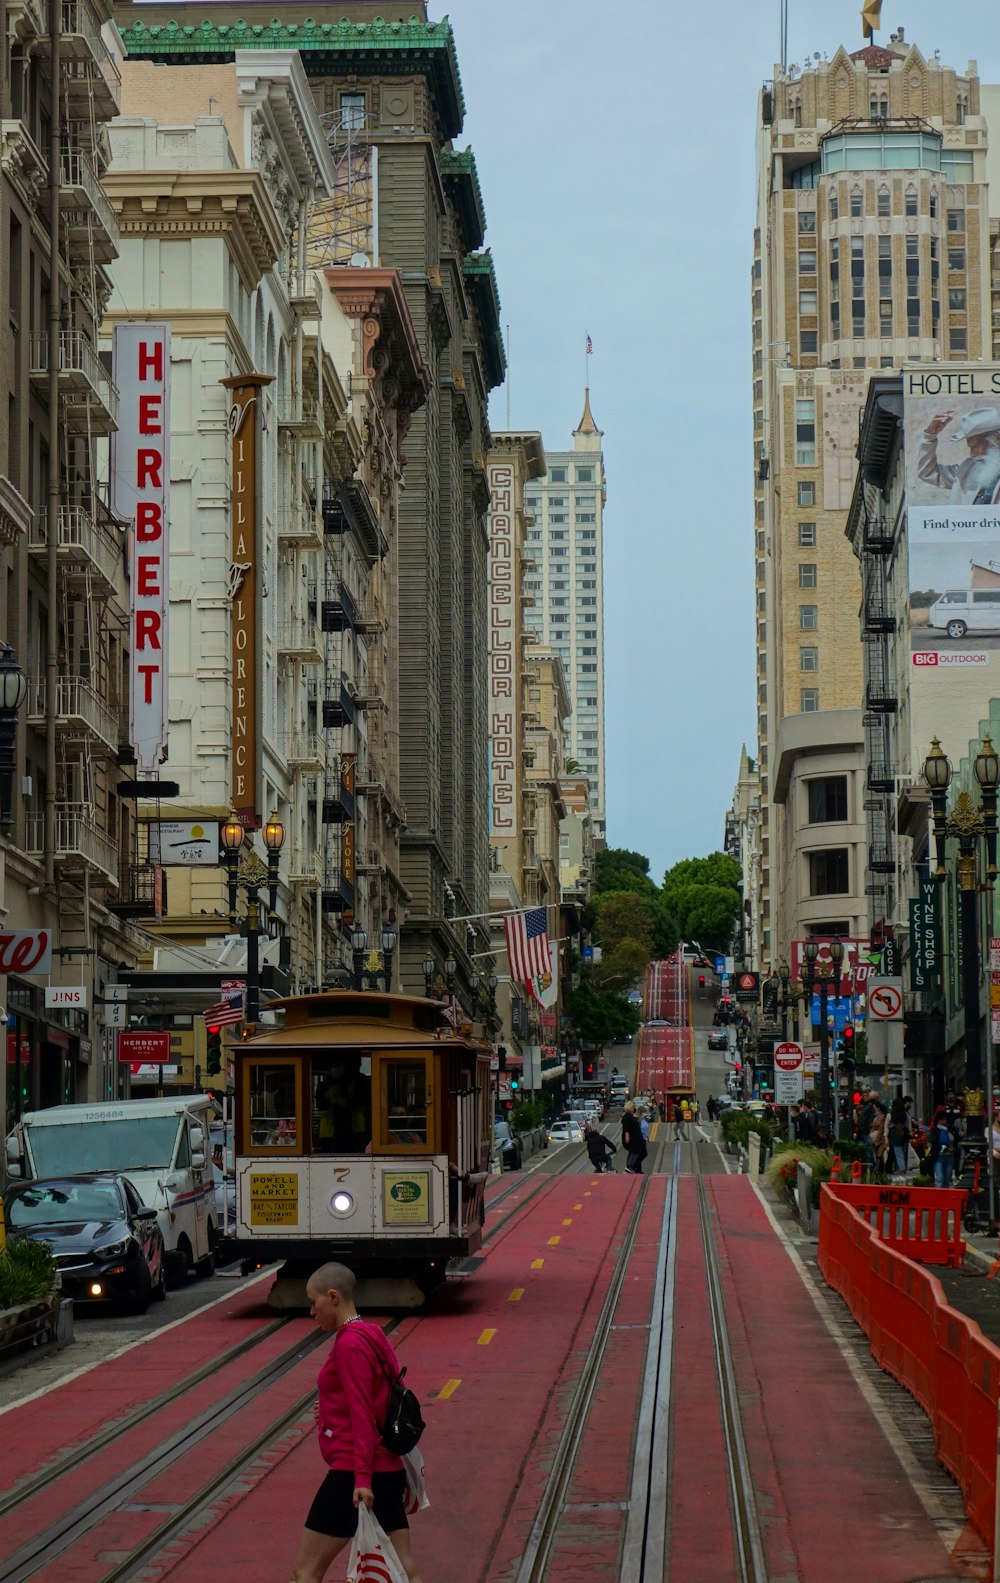 A trolley car traveling down a street next to tall buildings photo – Free  San francisco Image on Unsplash